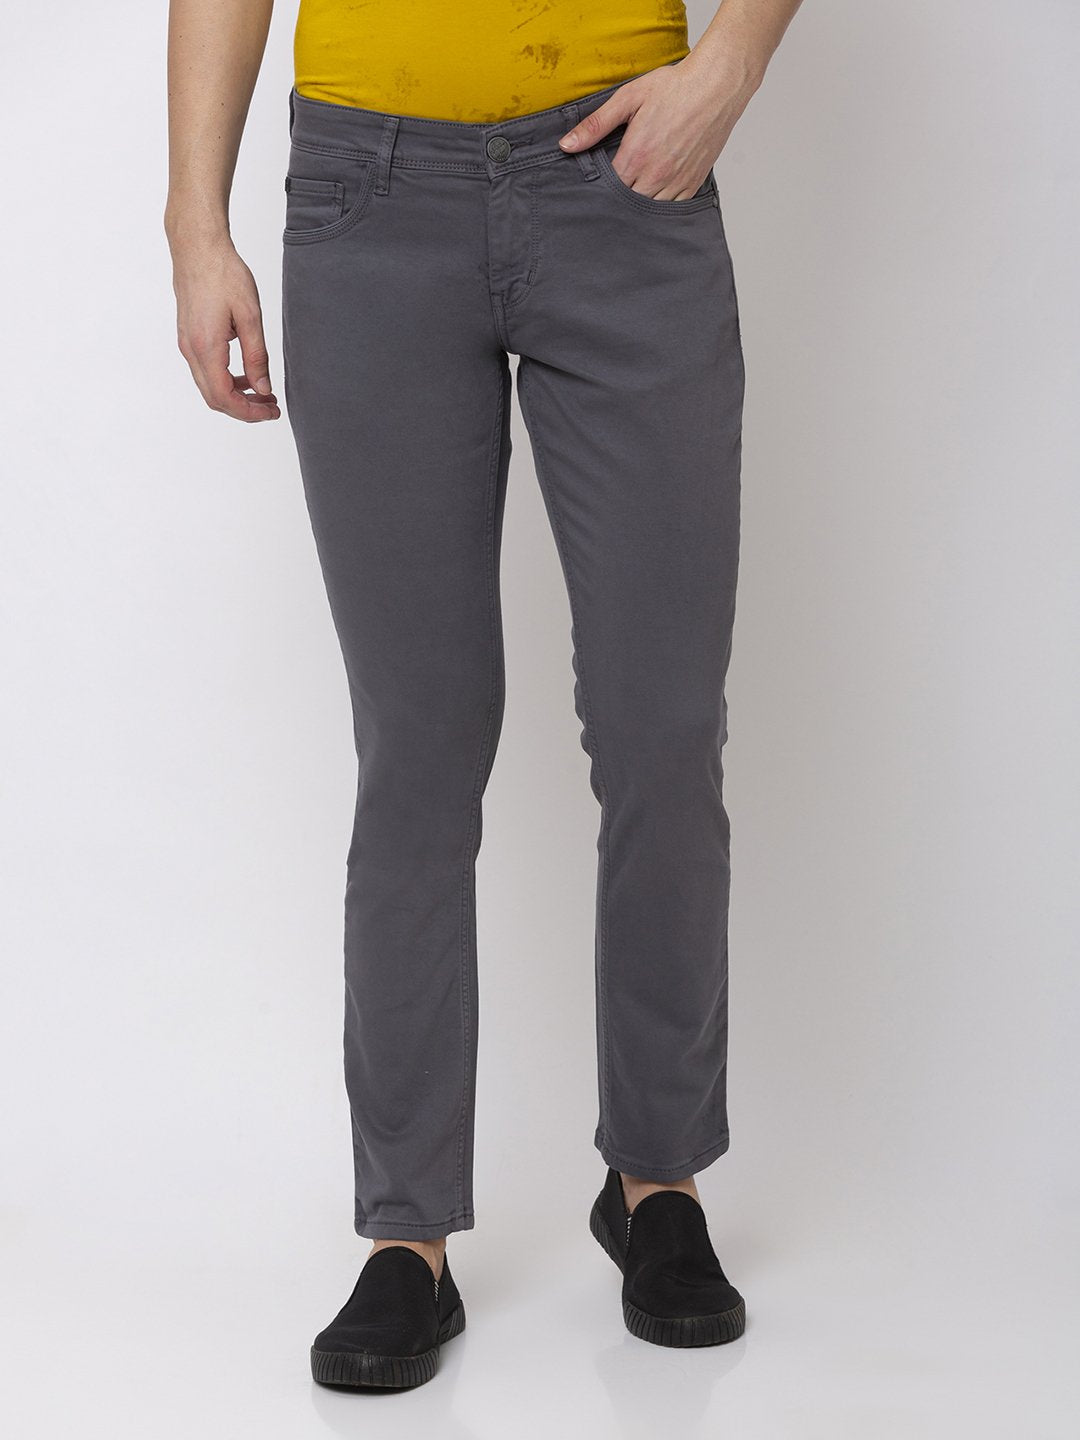 Status Quo |CHARCOAL Trouser - 30, 32, 34, 36, 38, 40